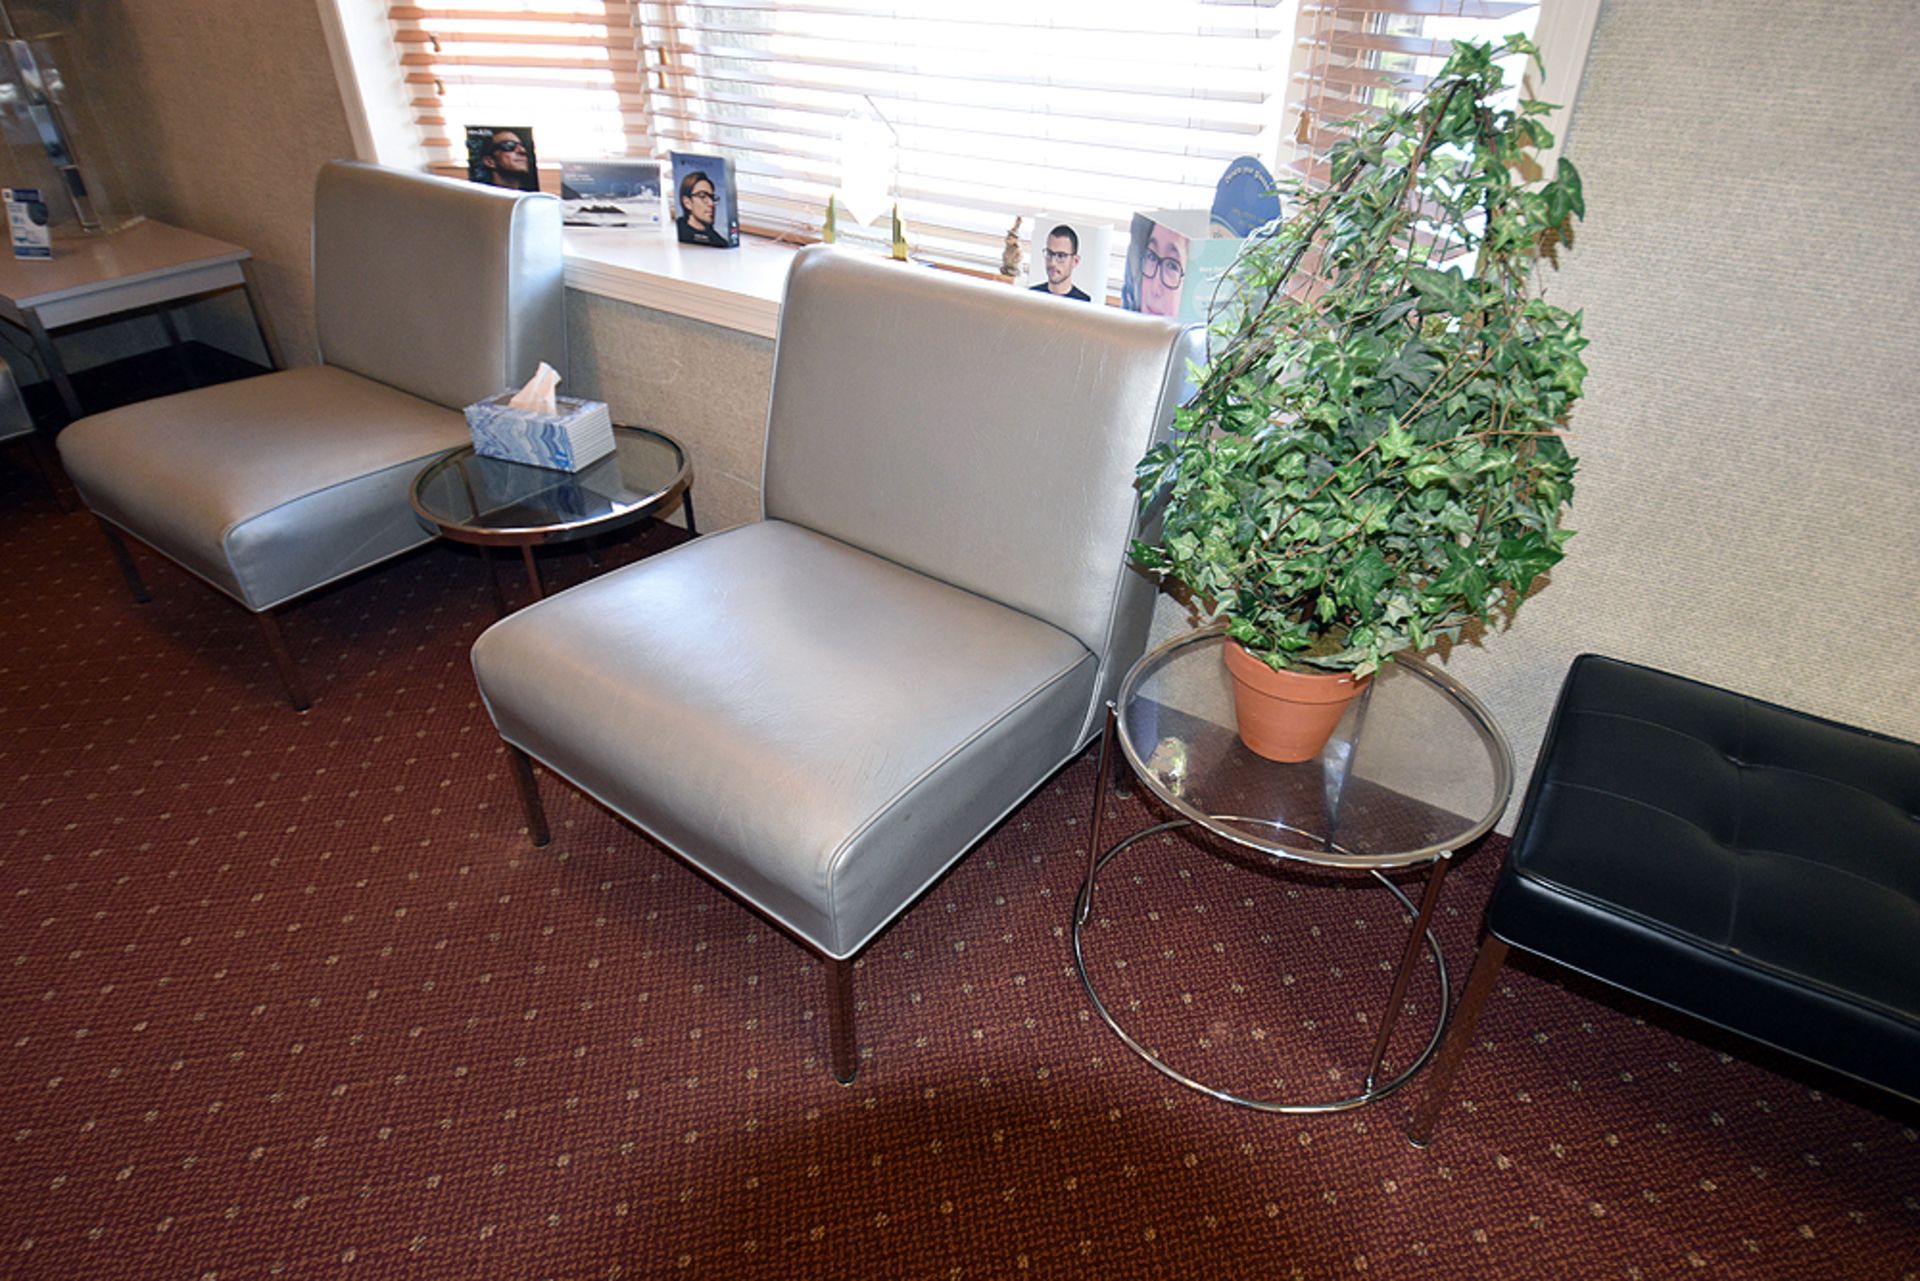 {Lot} A Group of Ass't Furniture Throughout Reception Area - Image 8 of 9